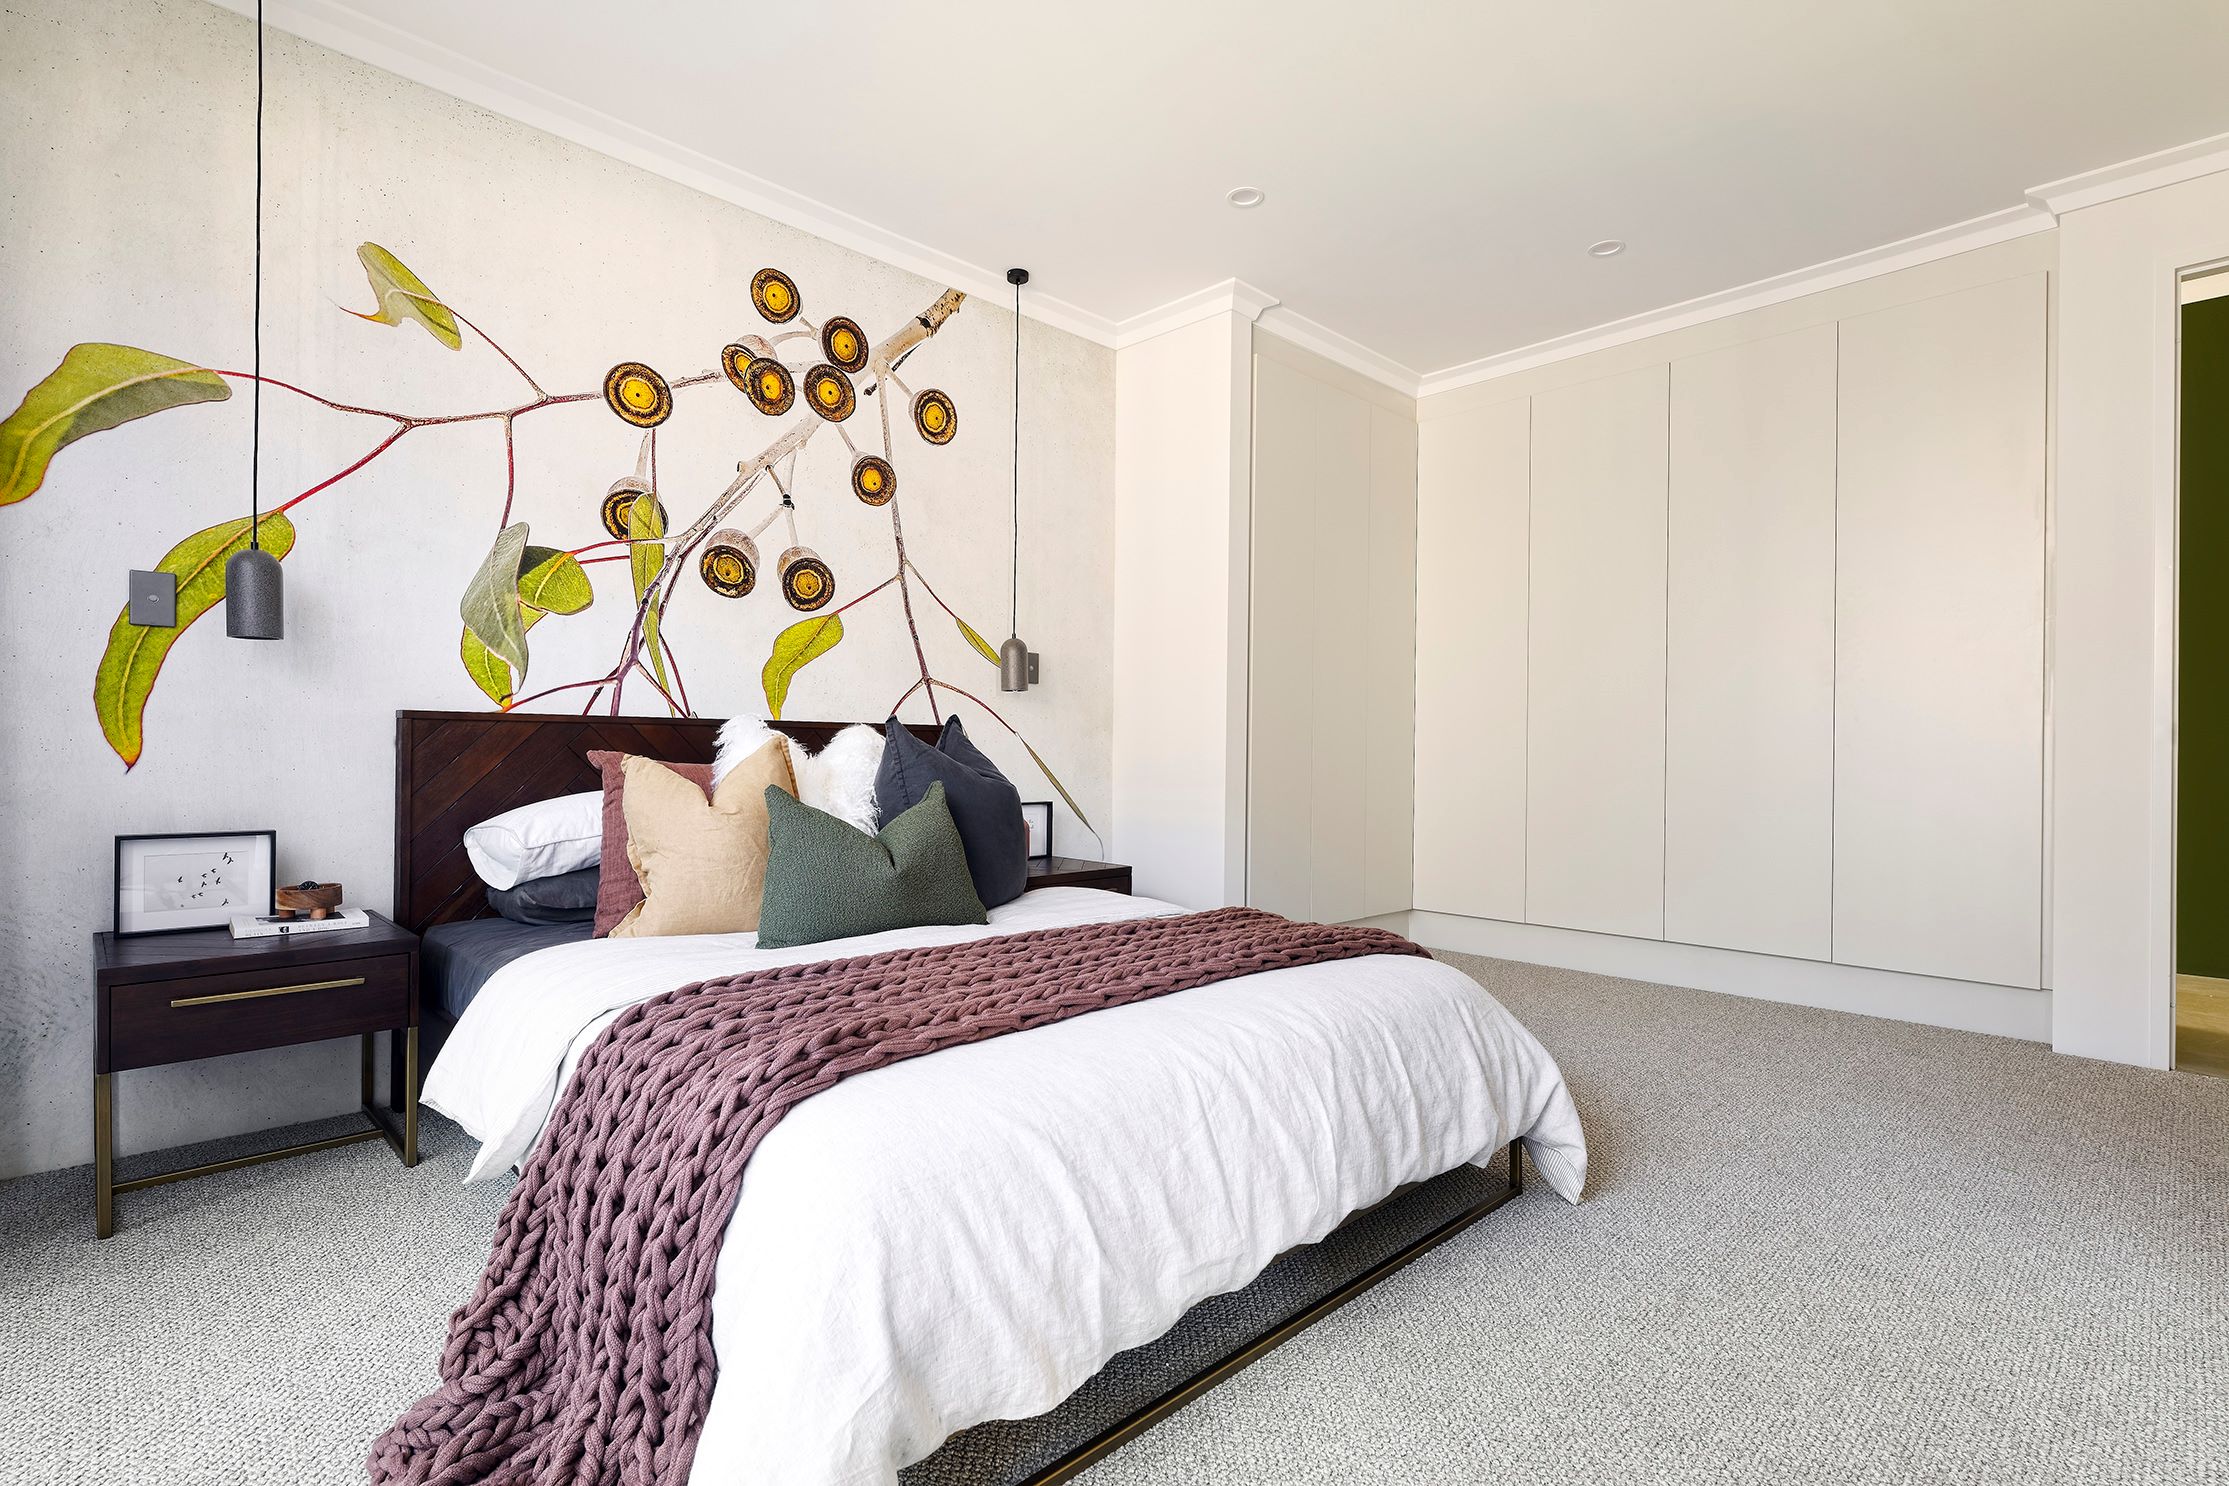 Myella, Wanneroo, Serpentine artist impression of a bed room